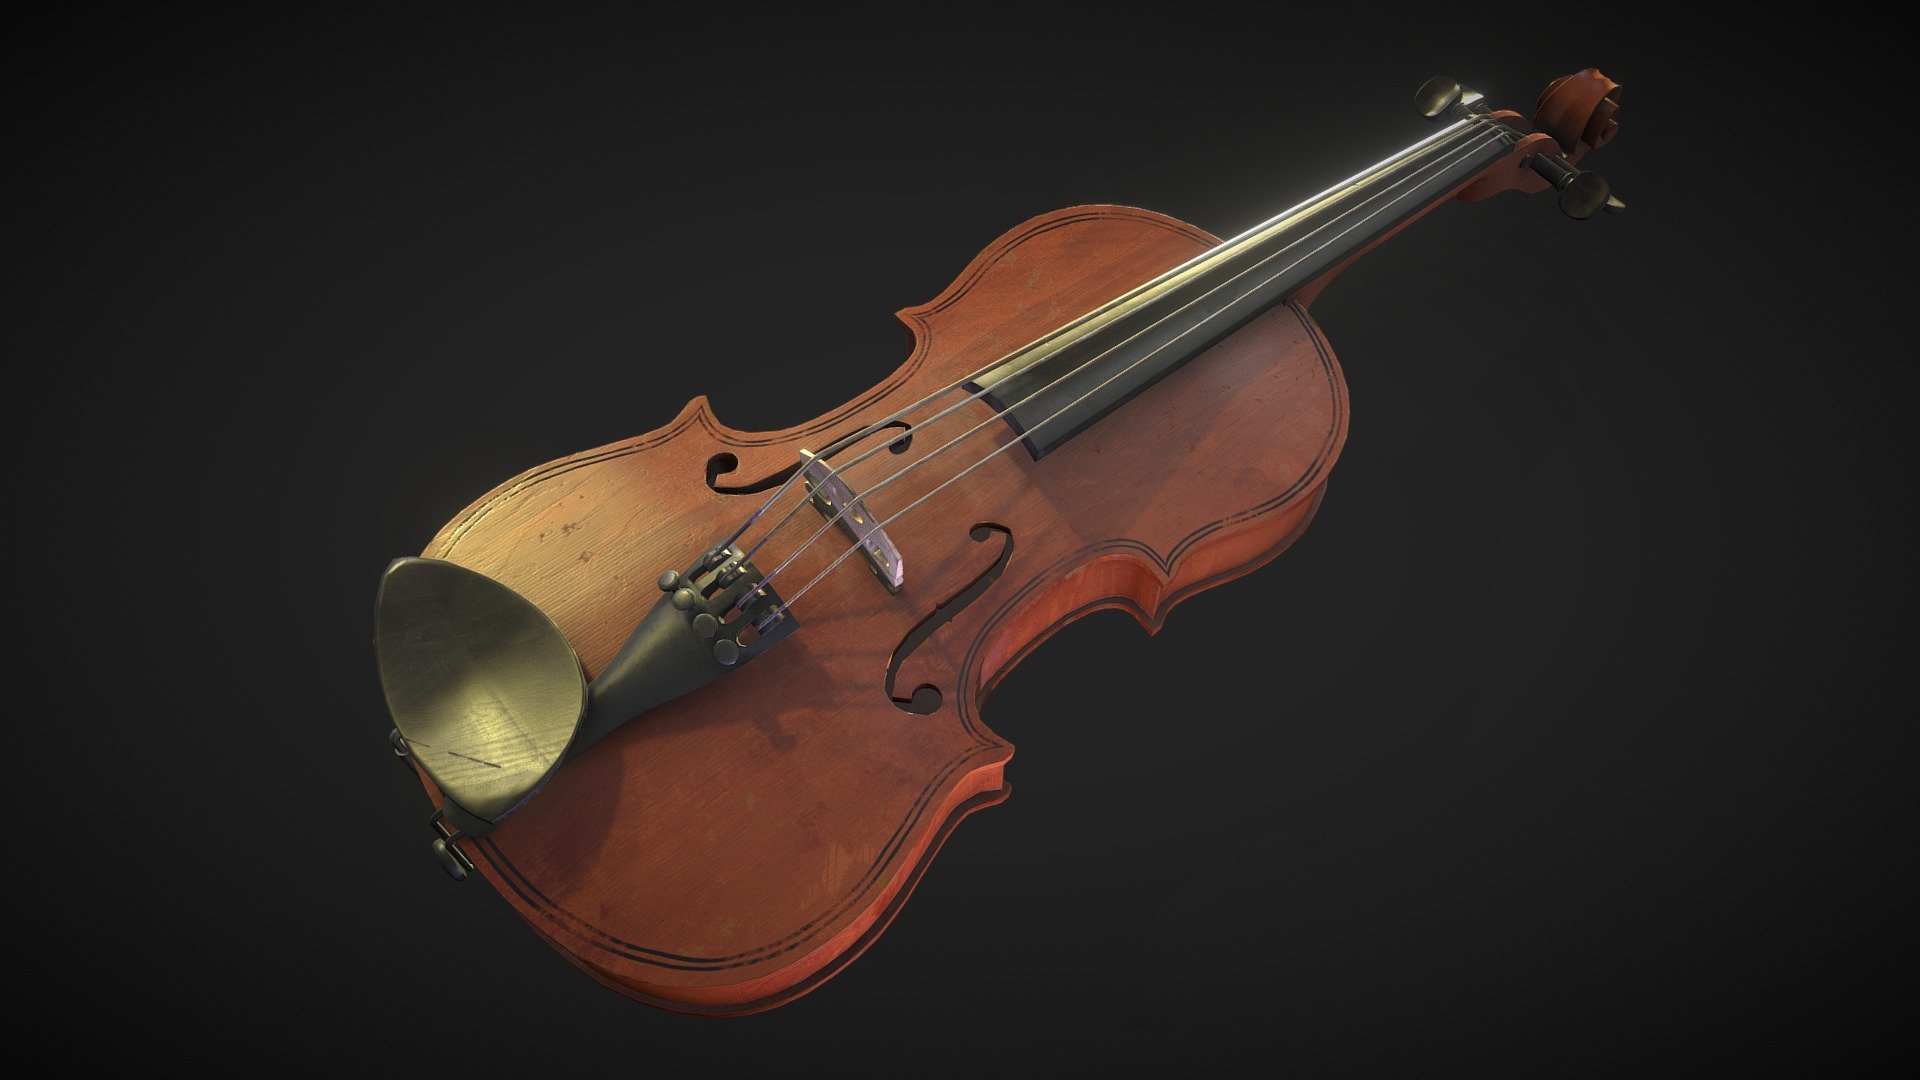 Everyone needs something to soothe their soul. Playing some violin, perhaps, could do the trick. Although this one hasn't seen much use lately 3d model